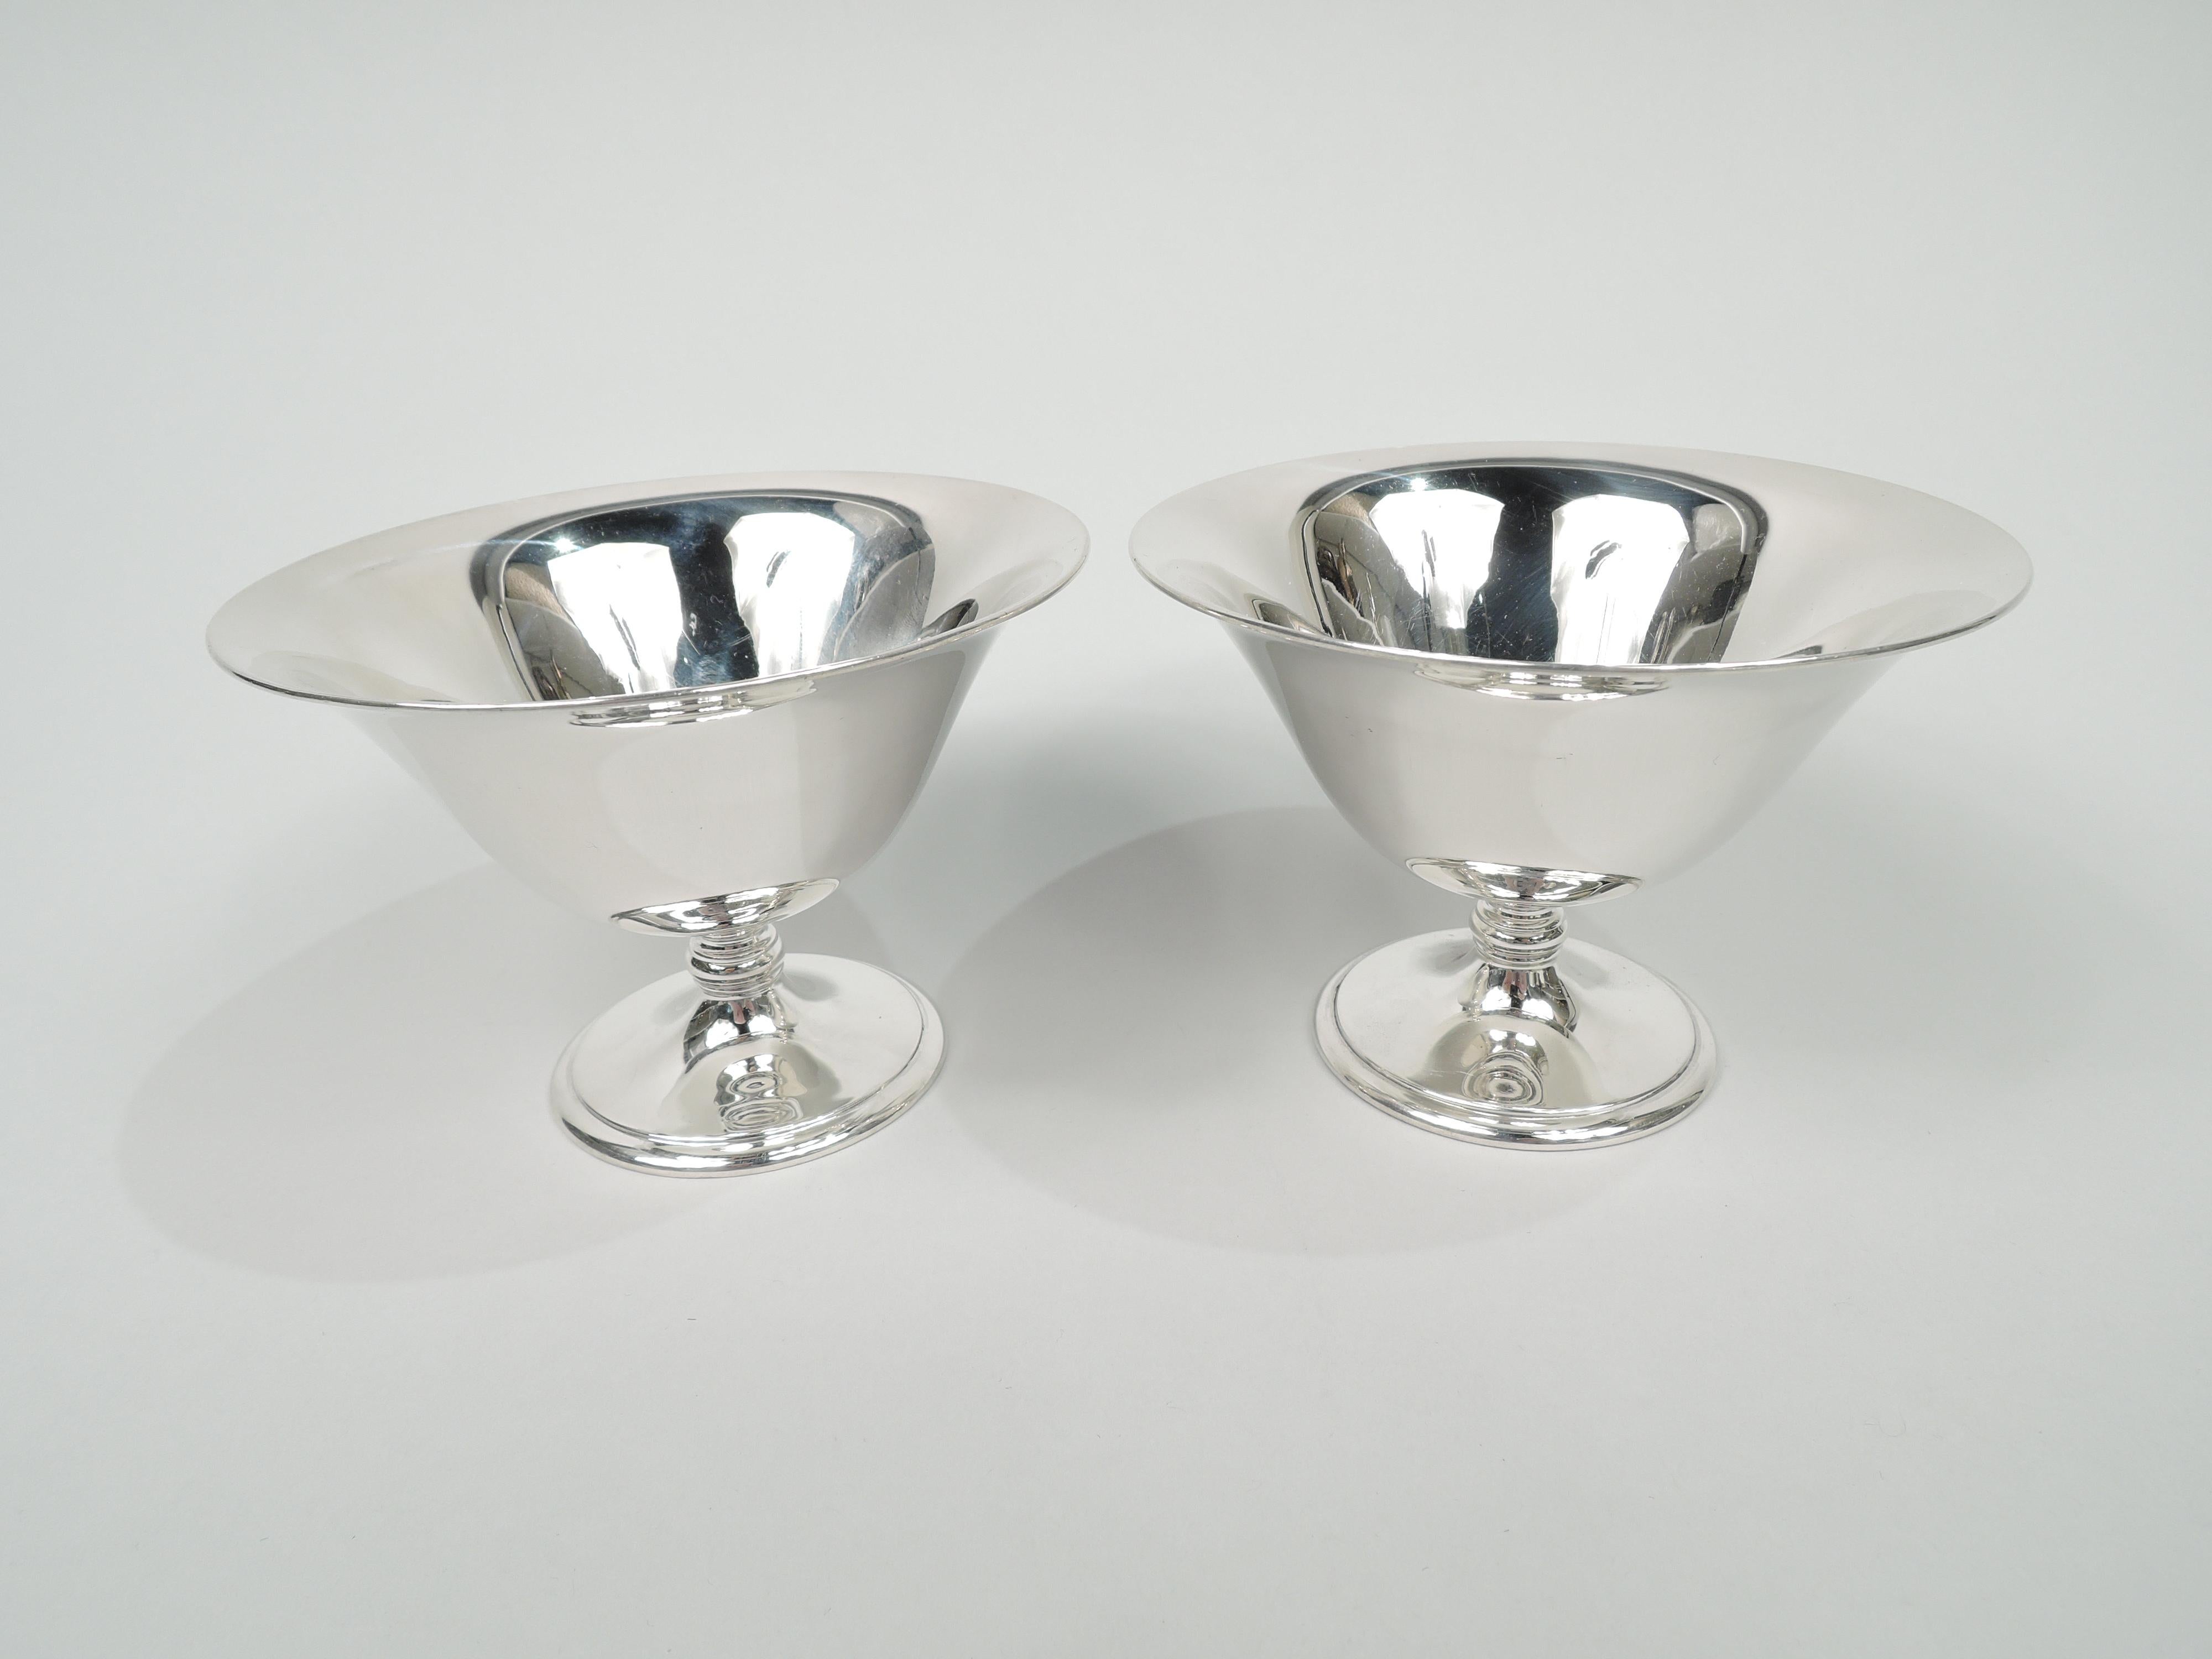 Twelve Modern sterling silver dessert cups. Made by Tiffany & Co. in New York, ca 1926. Each: Round bowl with flared rim and curved and tapering sides; knopped stem and raised and stepped foot. A great set for serving your favorite gelato. Fully